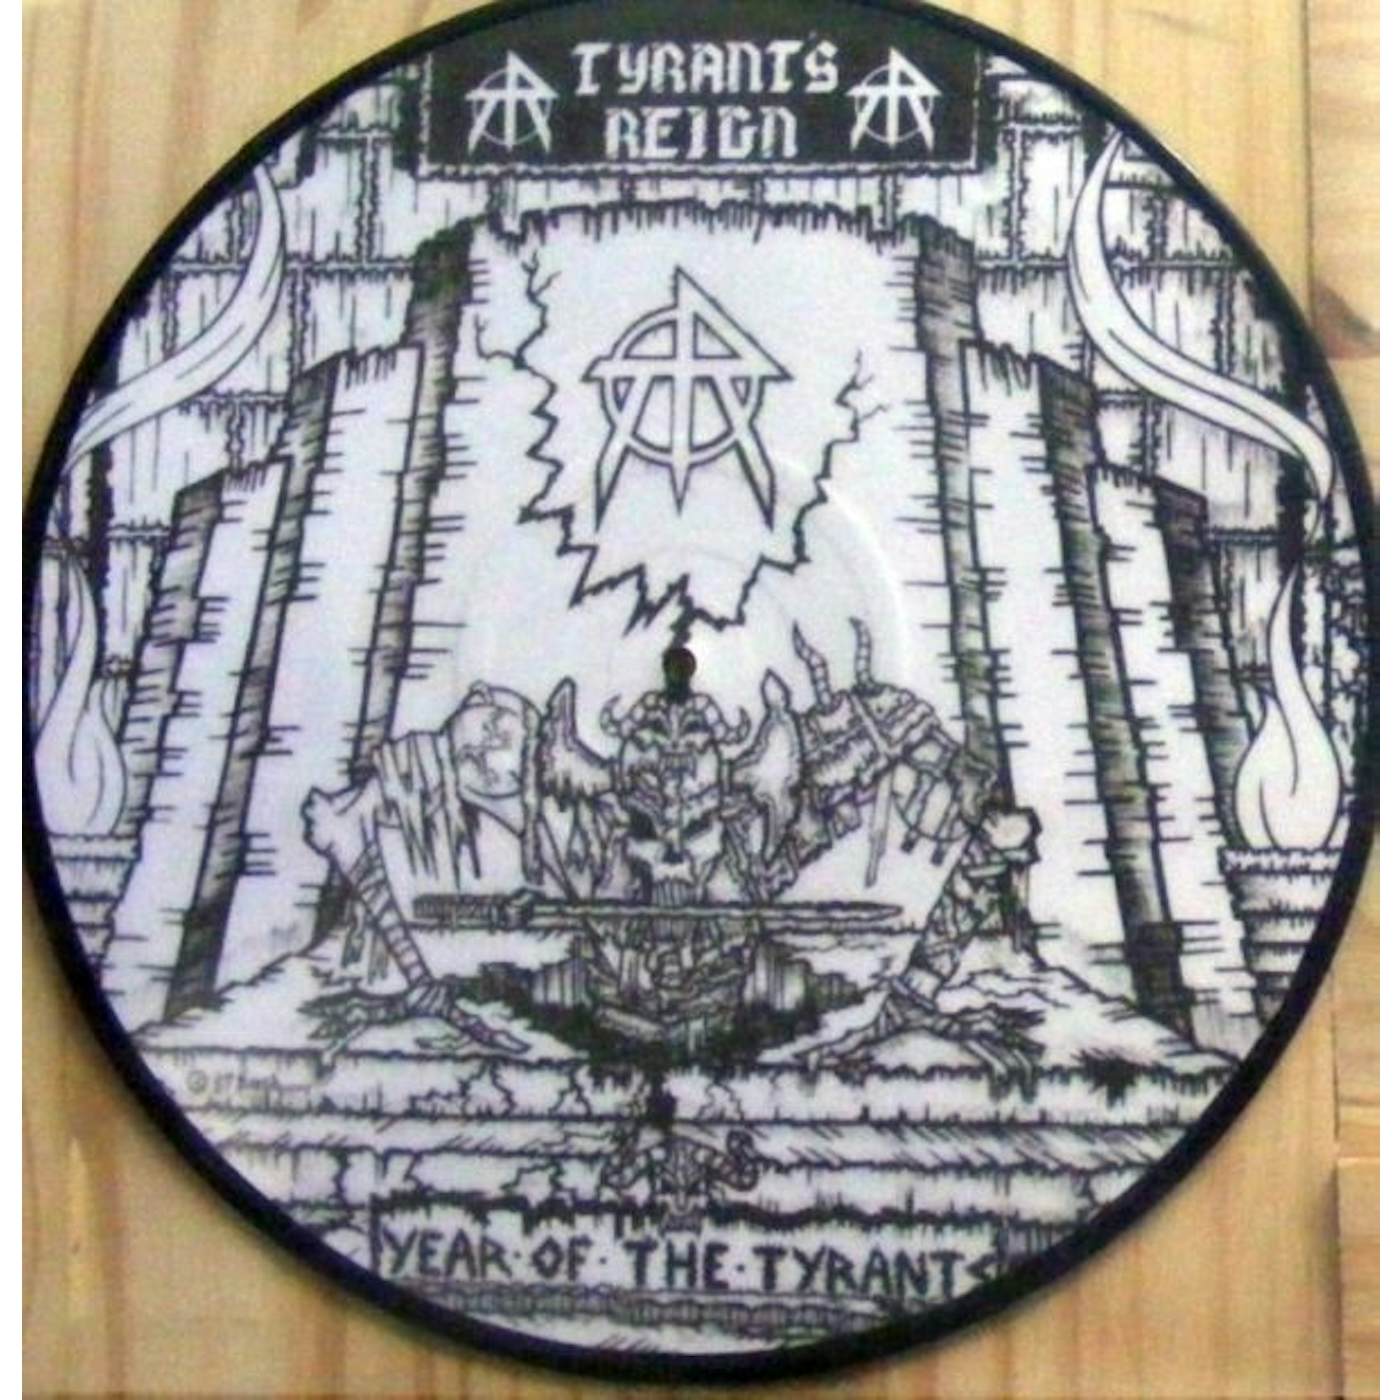 Tyrant's Reign YEAR OF THE TYRANT Vinyl Record